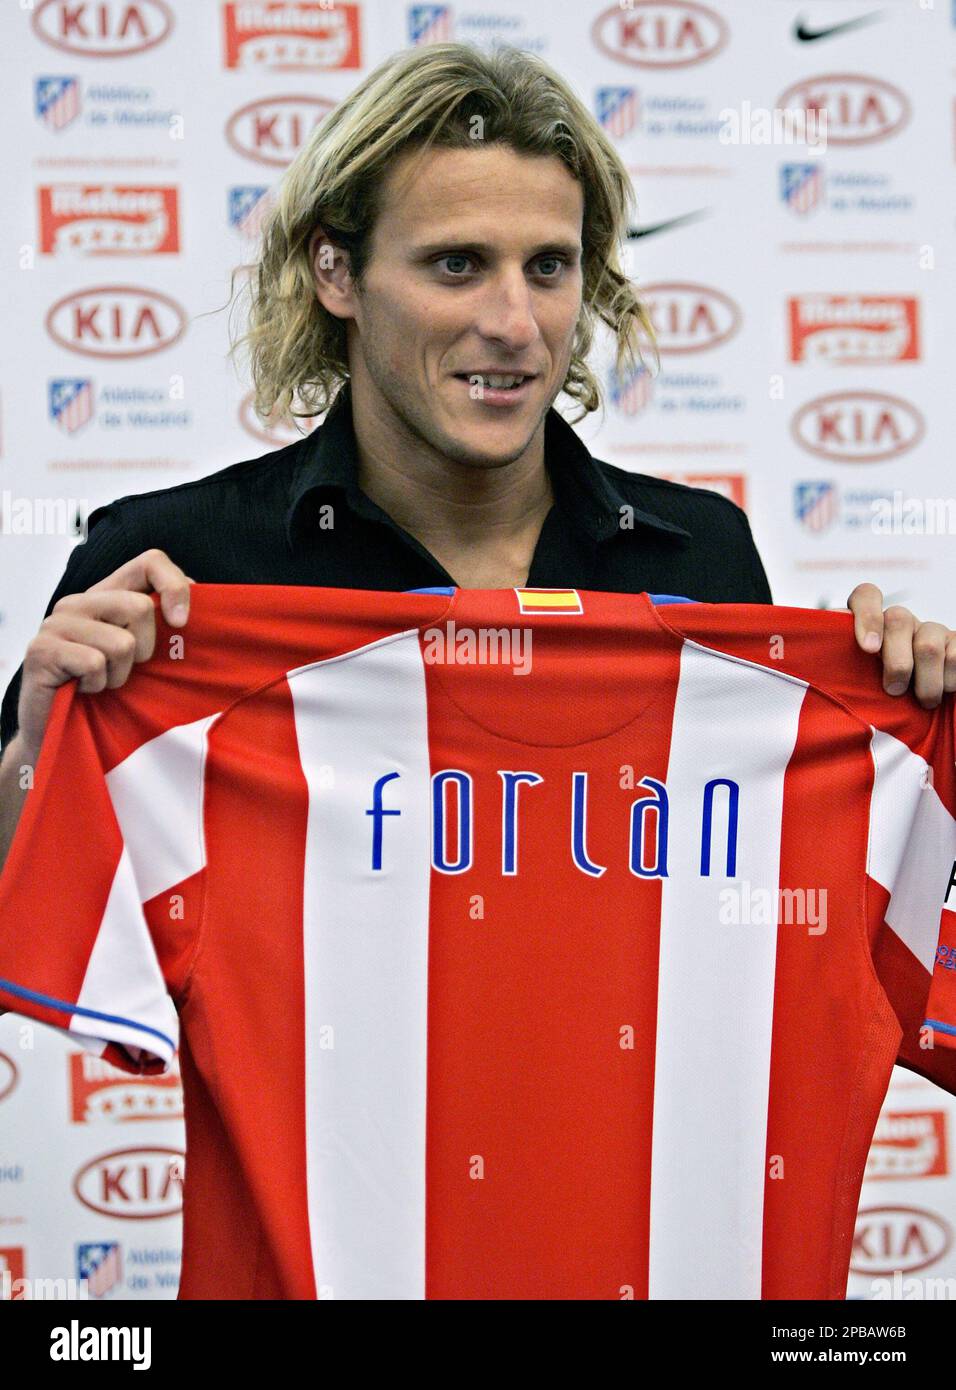 Diego Forlan of Uruguay holds up his new shirt during his official  presentation for Atletico Madrid at the Vicente Calderon stadium in Madrid,  Tuesday July 17, 2007. Forlan previously played for Villarreal,